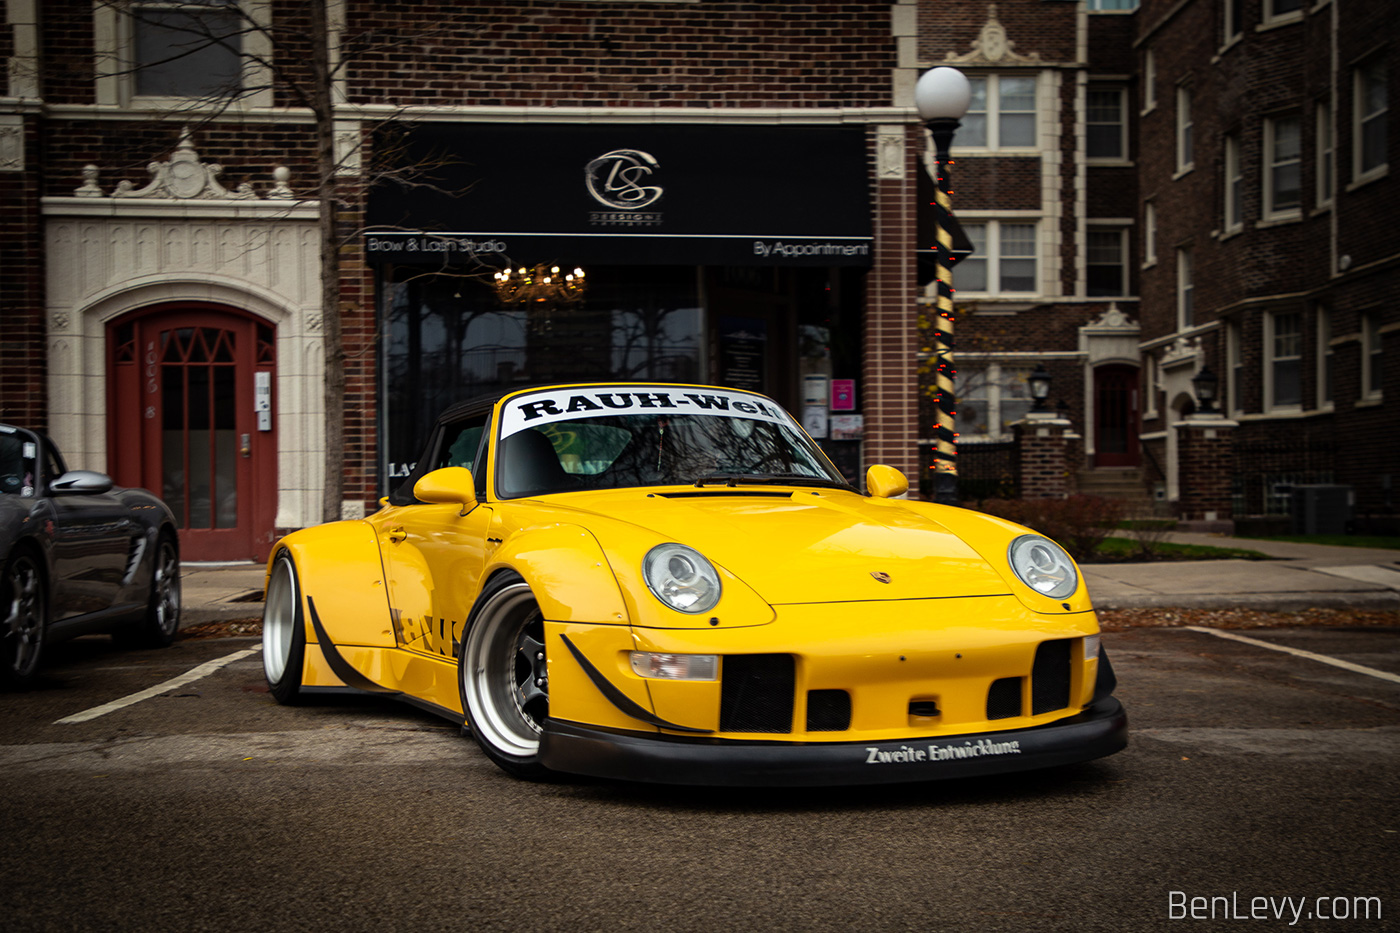 RWB Nohra heading out to a rally in Chicago